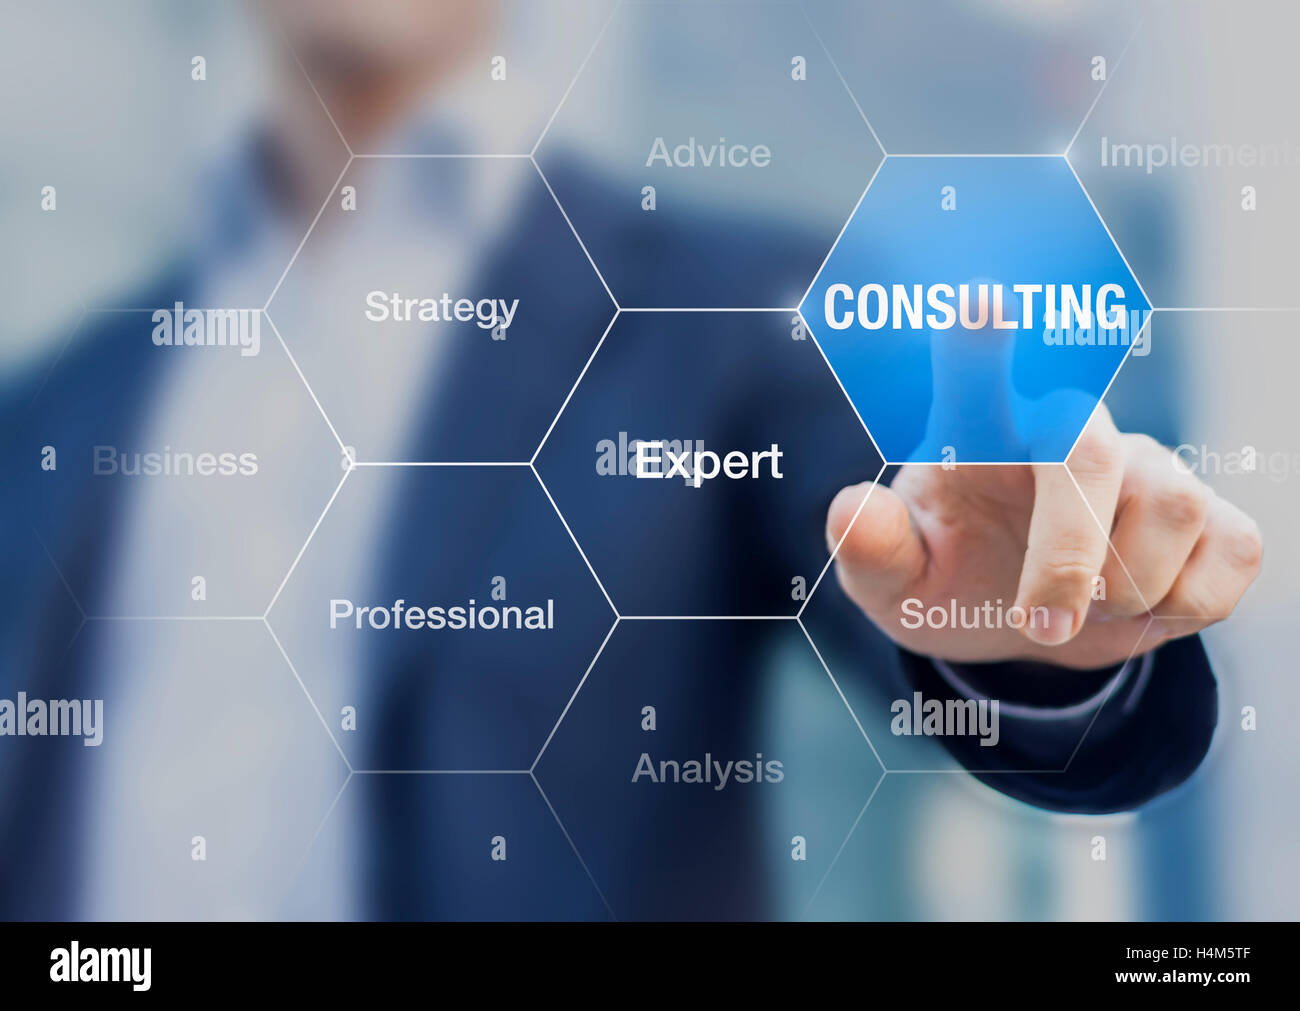 Businessman presenting concept about consulting, expert advices and solutions for companies Stock Photo